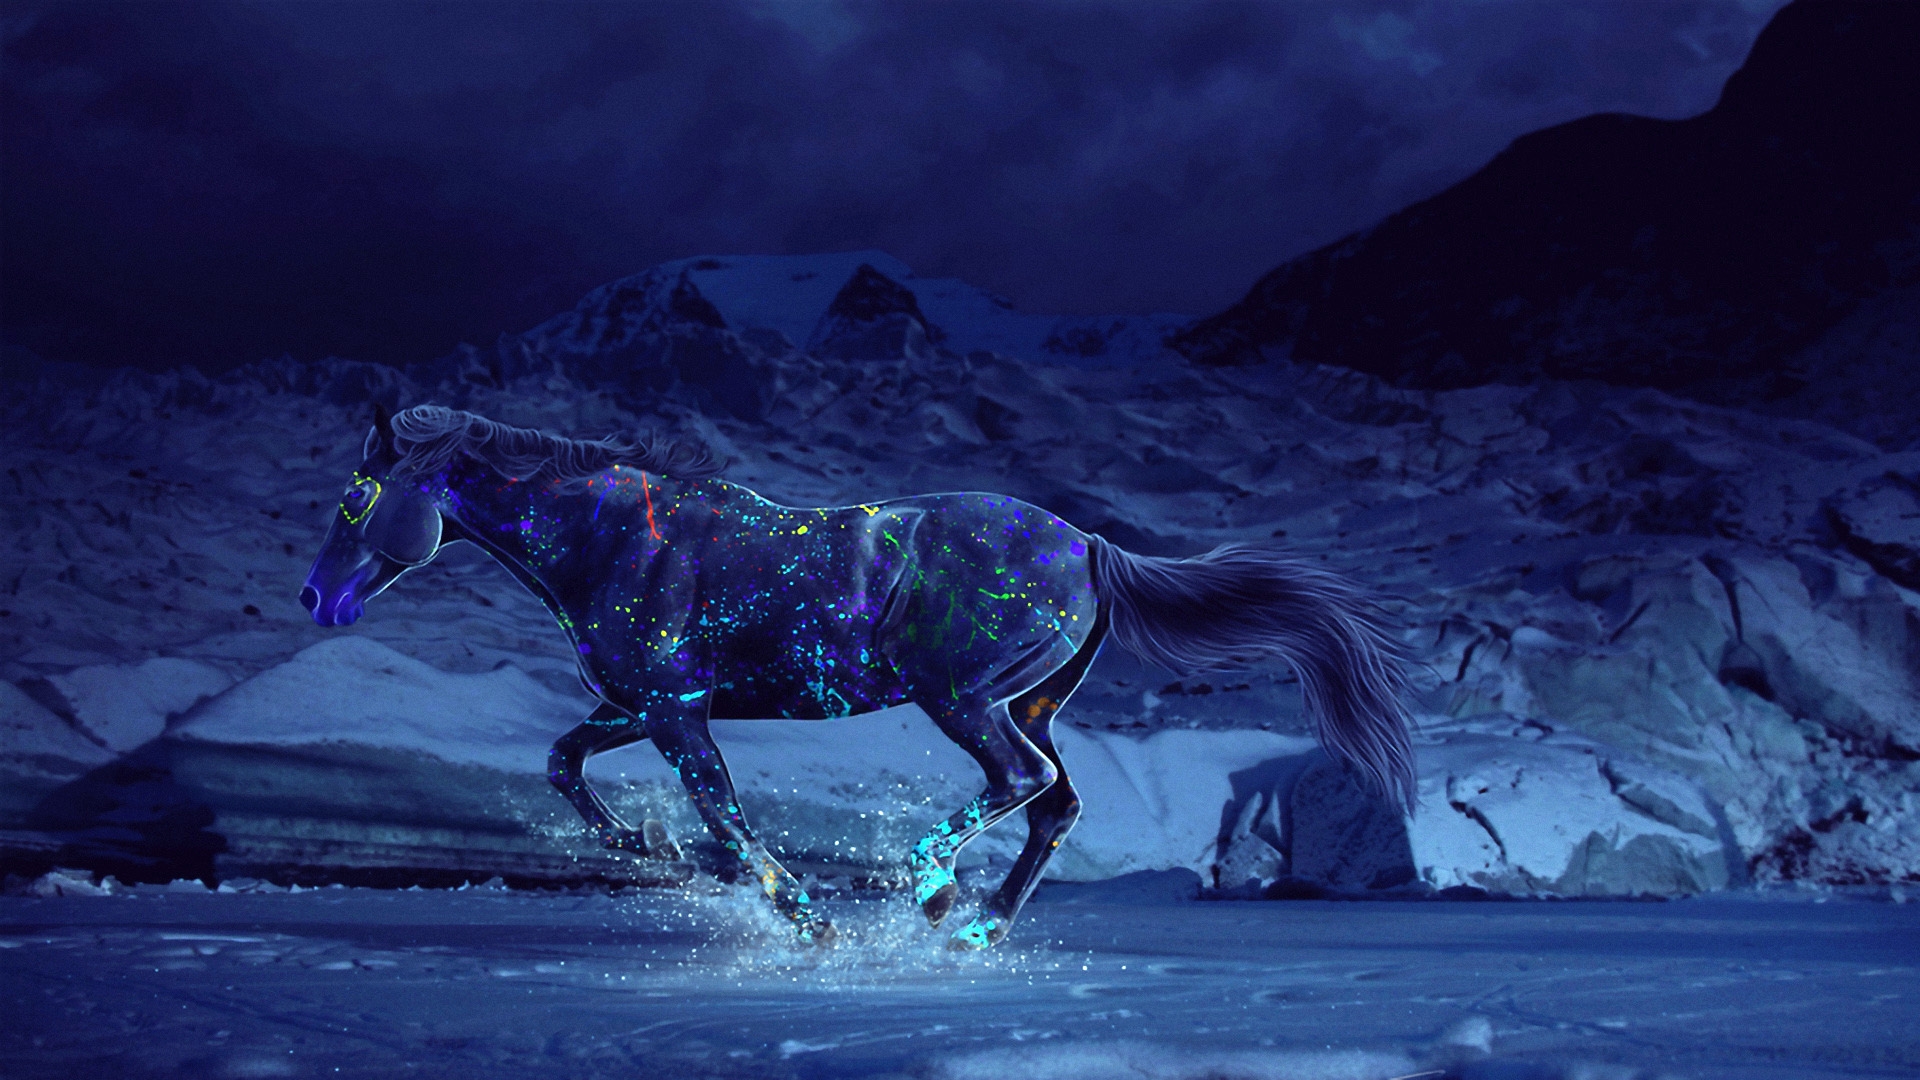 horse wallpapers 1080p